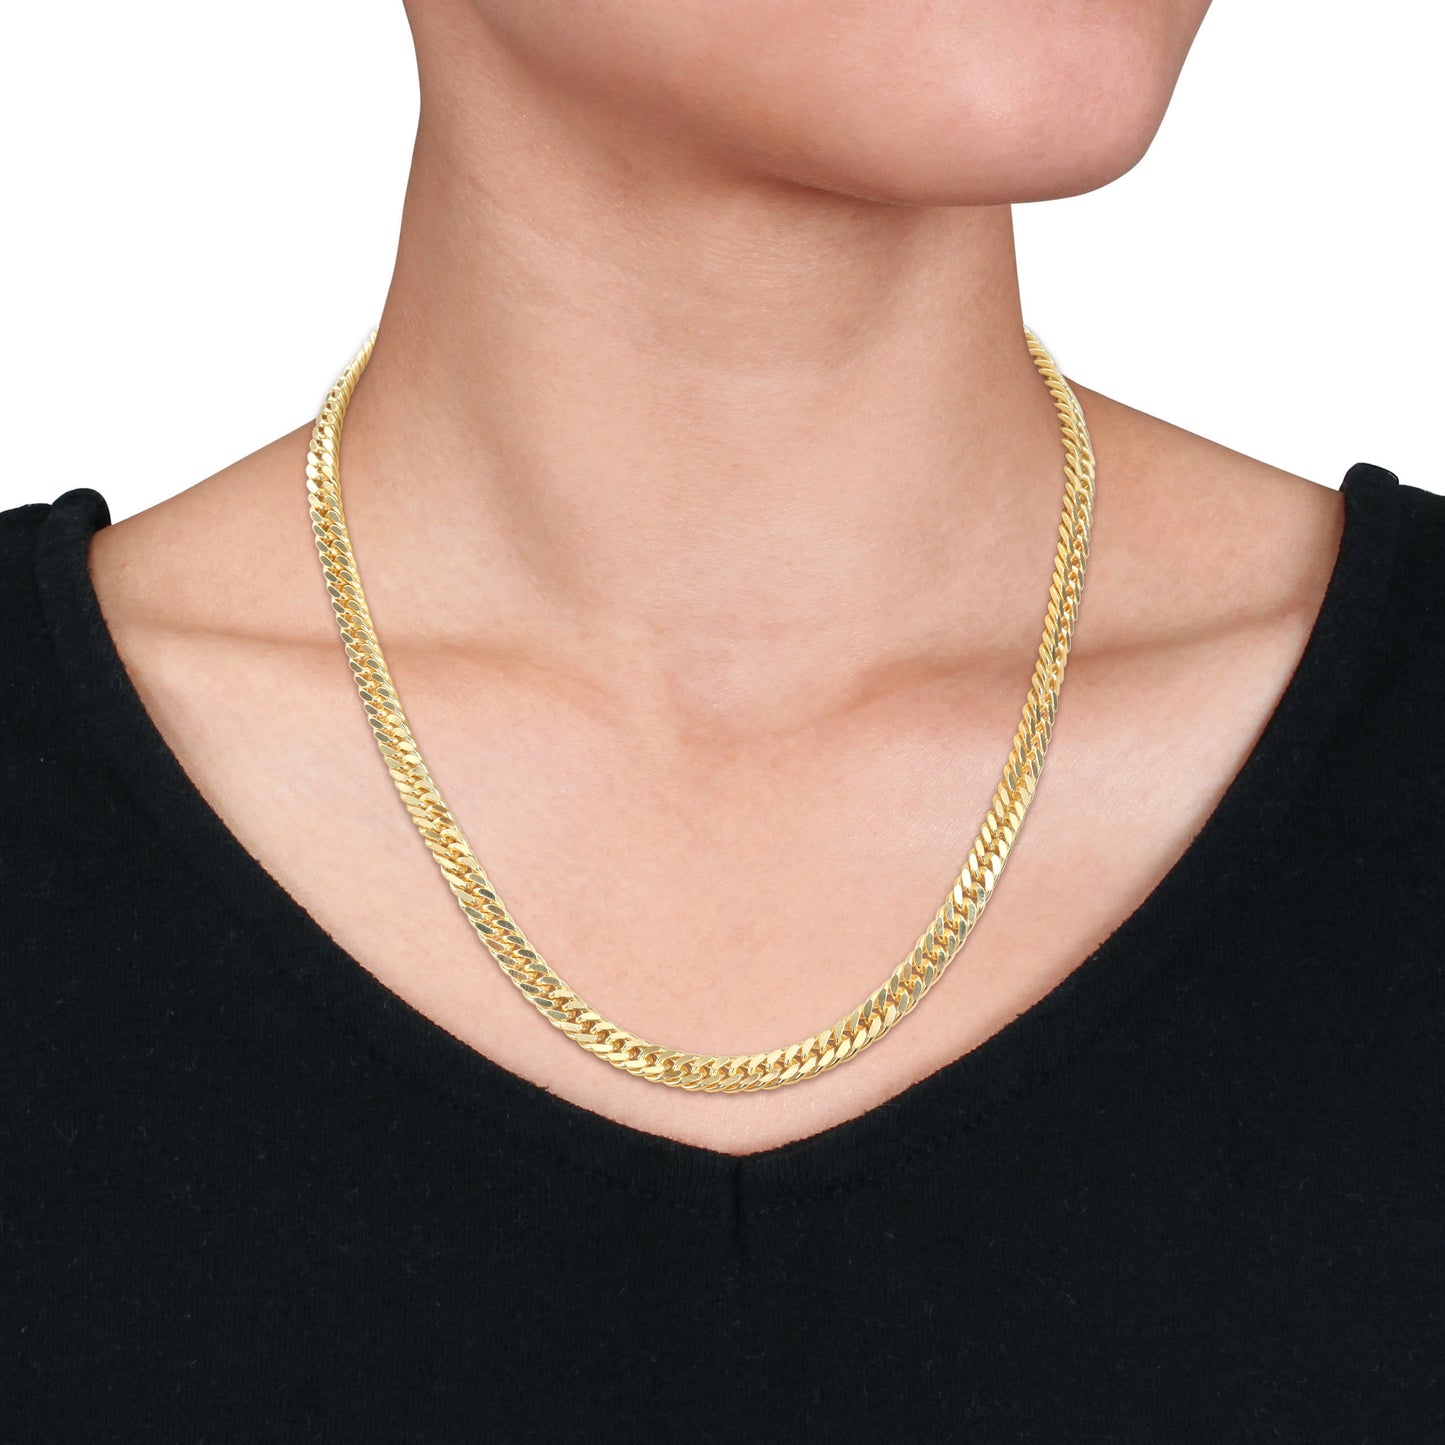 18k Yellow Gold Plated Curb Link Chain in 5.7mm